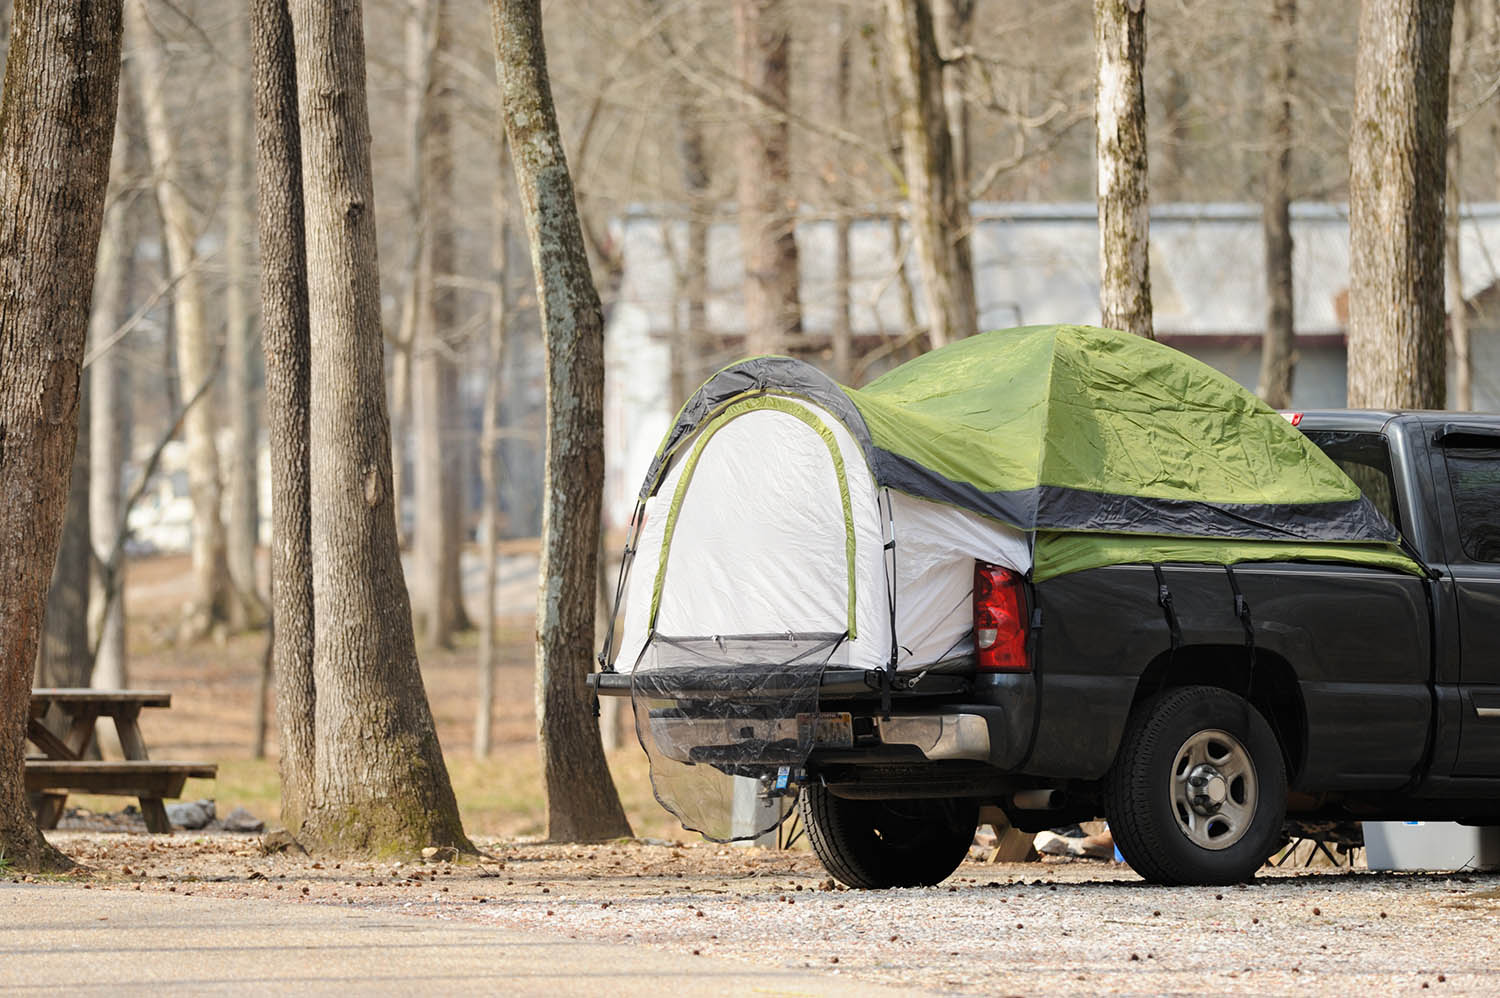 Pickup truck with a tent in its bed